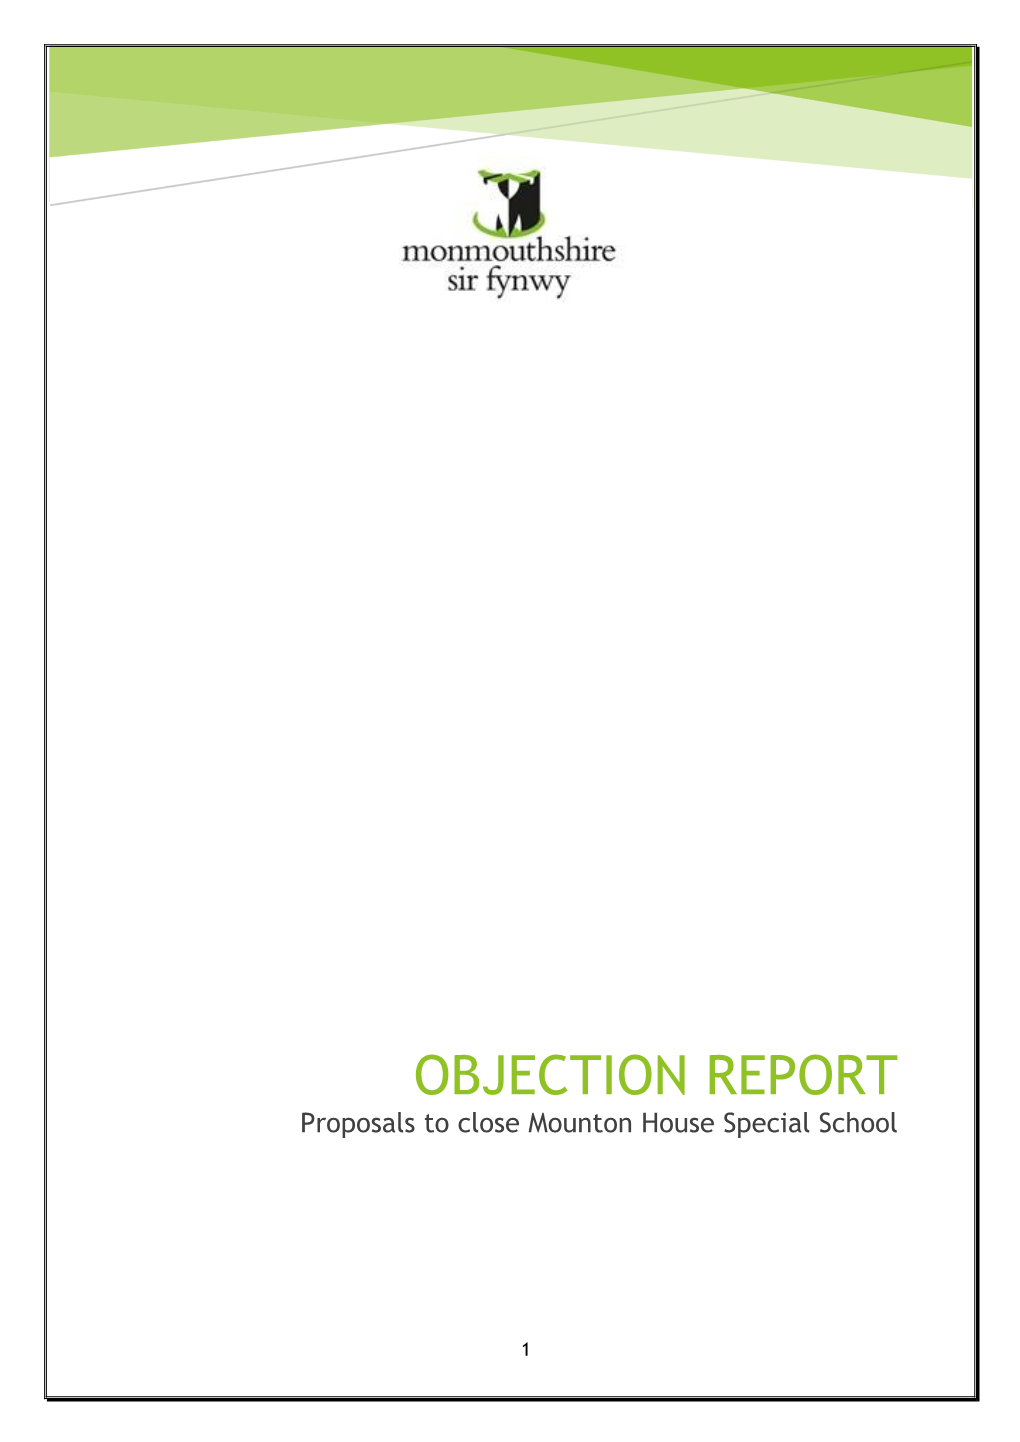 OBJECTION REPORT Proposals to Close Mounton House Special School